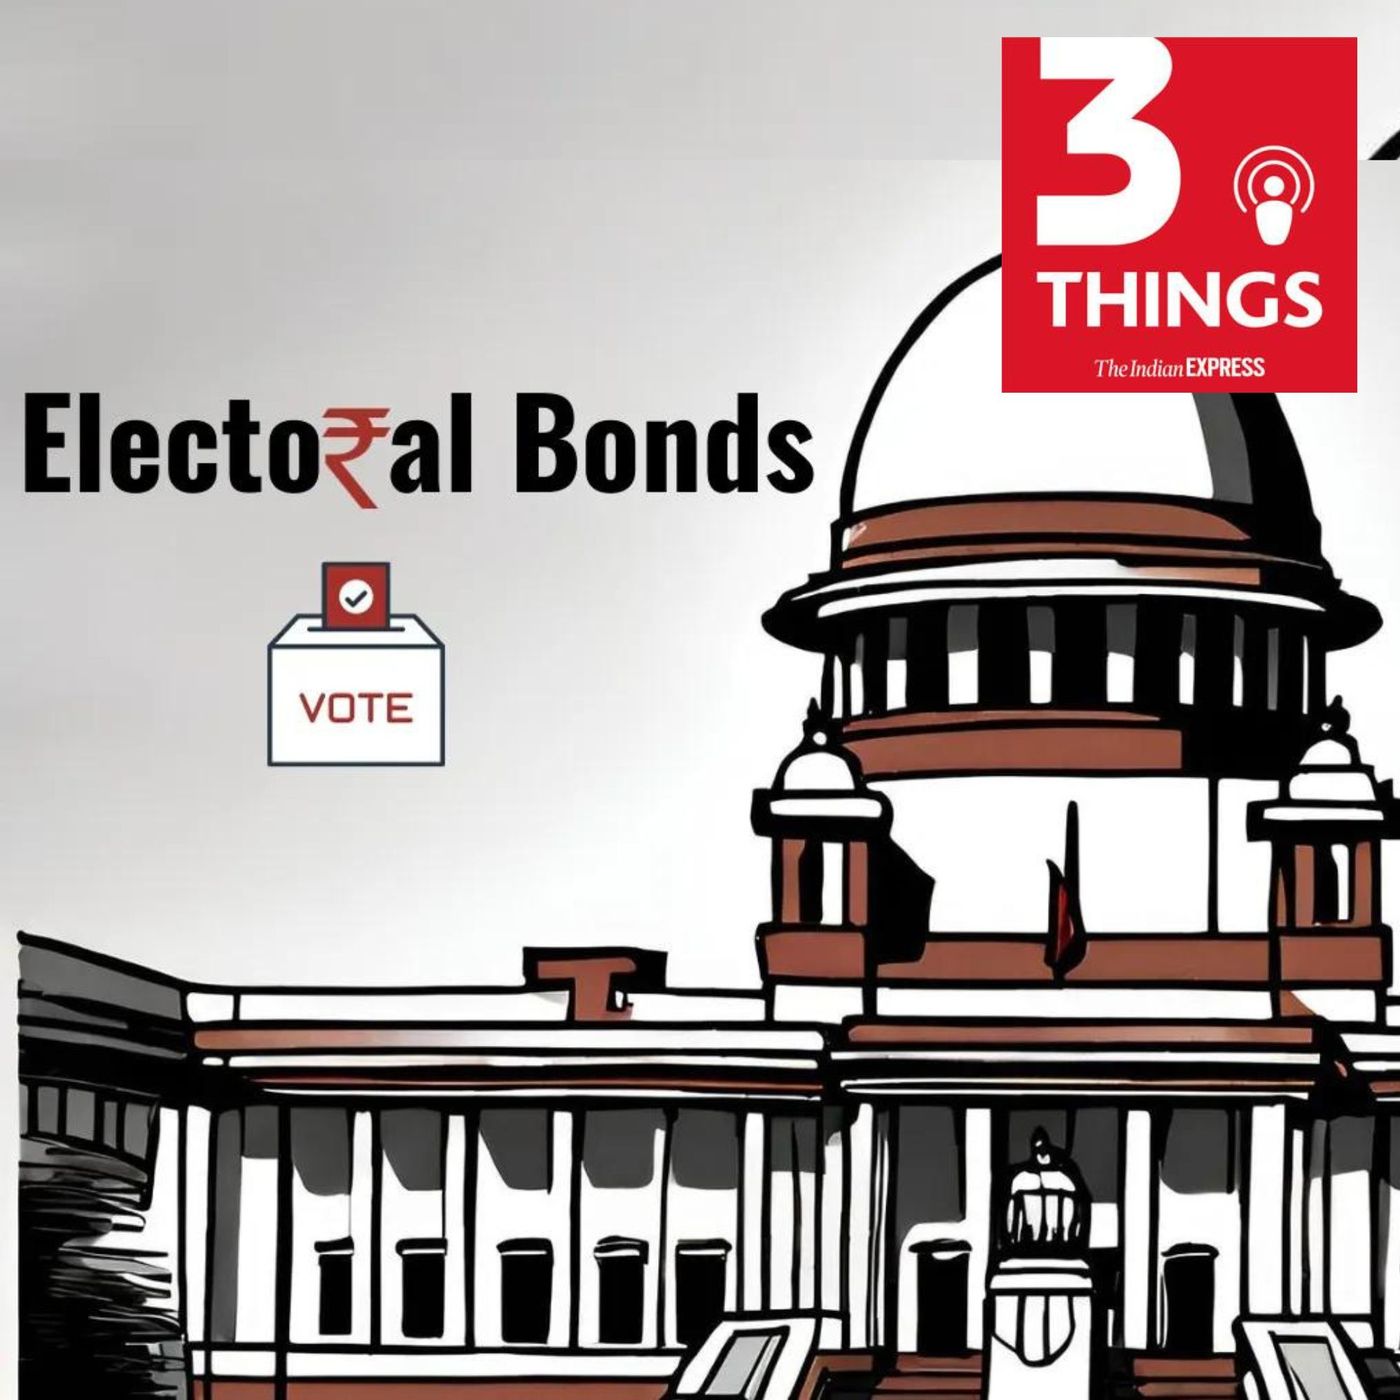 More on electoral bonds, Kolkata building collapse, and China's claims